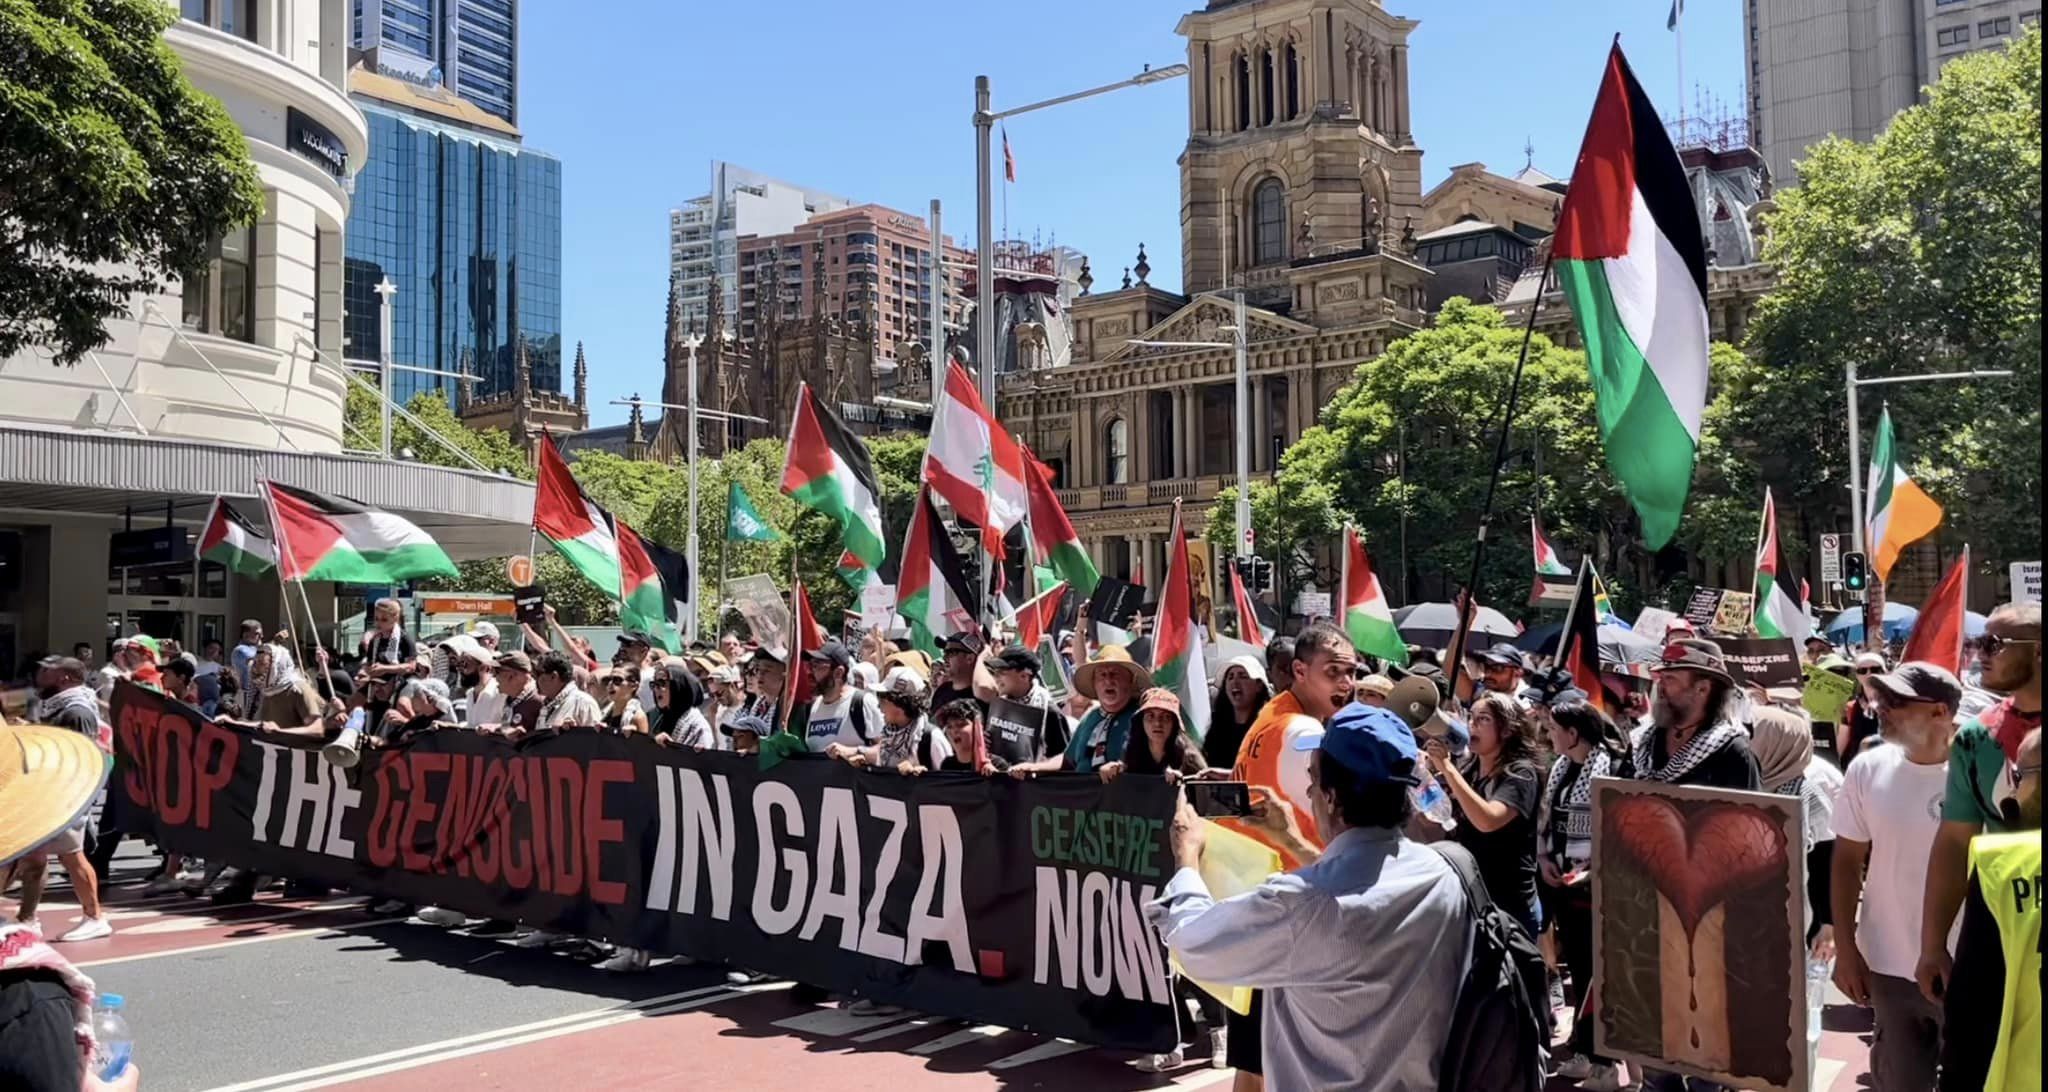 January 21 rally in Naarm/Melbourne to free Palestine